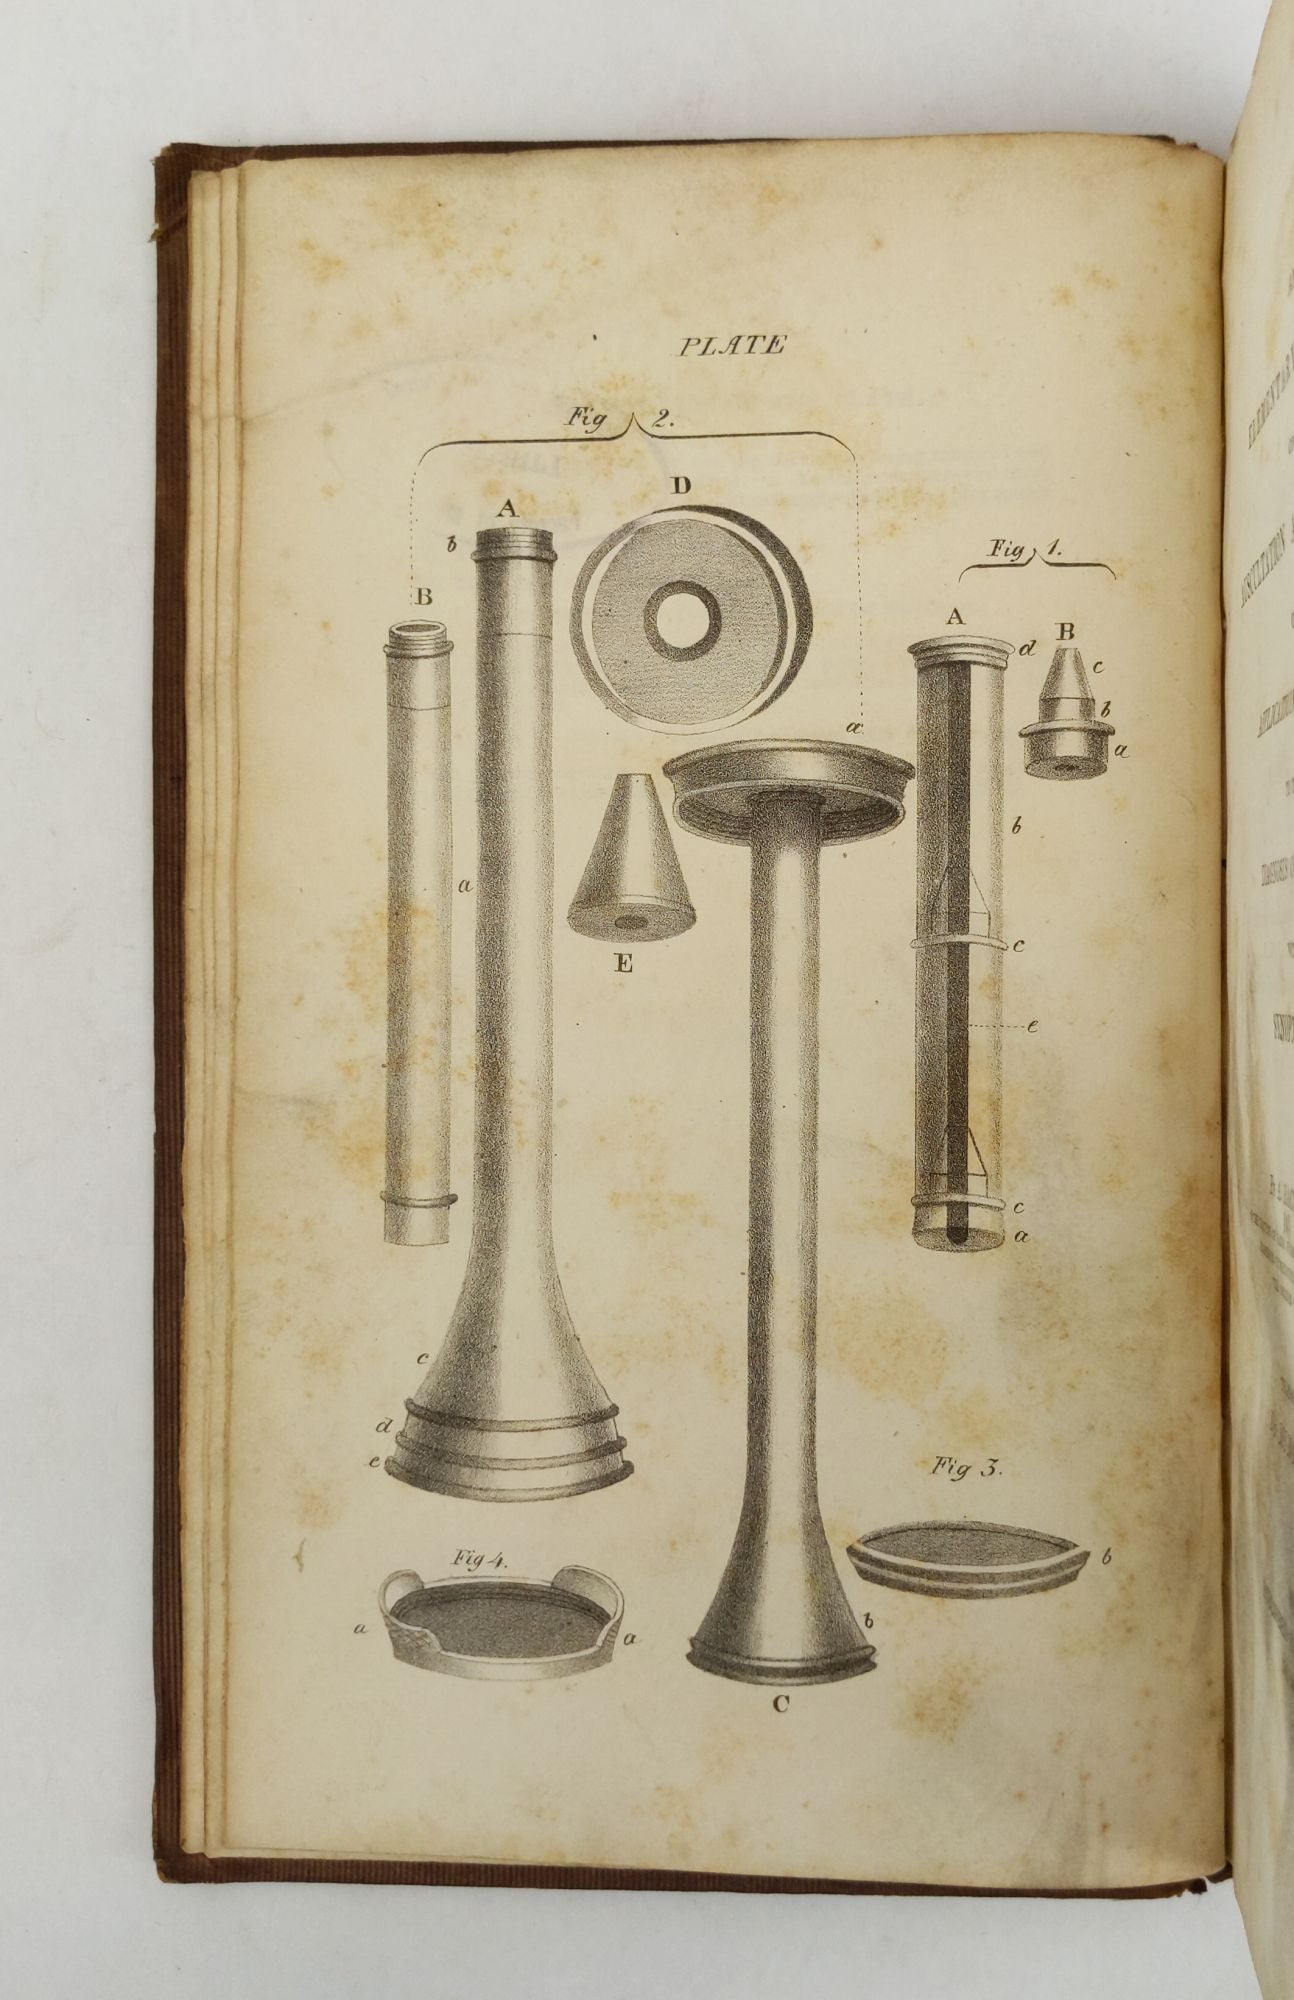 Product Image for AN ELEMENTARY TREATISE ON AUSCULTATION AND PERCUSSION, OR THE APPLICATION OF ACOUSTICS TO THE DIAGNOSIS OF DISEASES, WITH A SYNOPTICAL TABLE